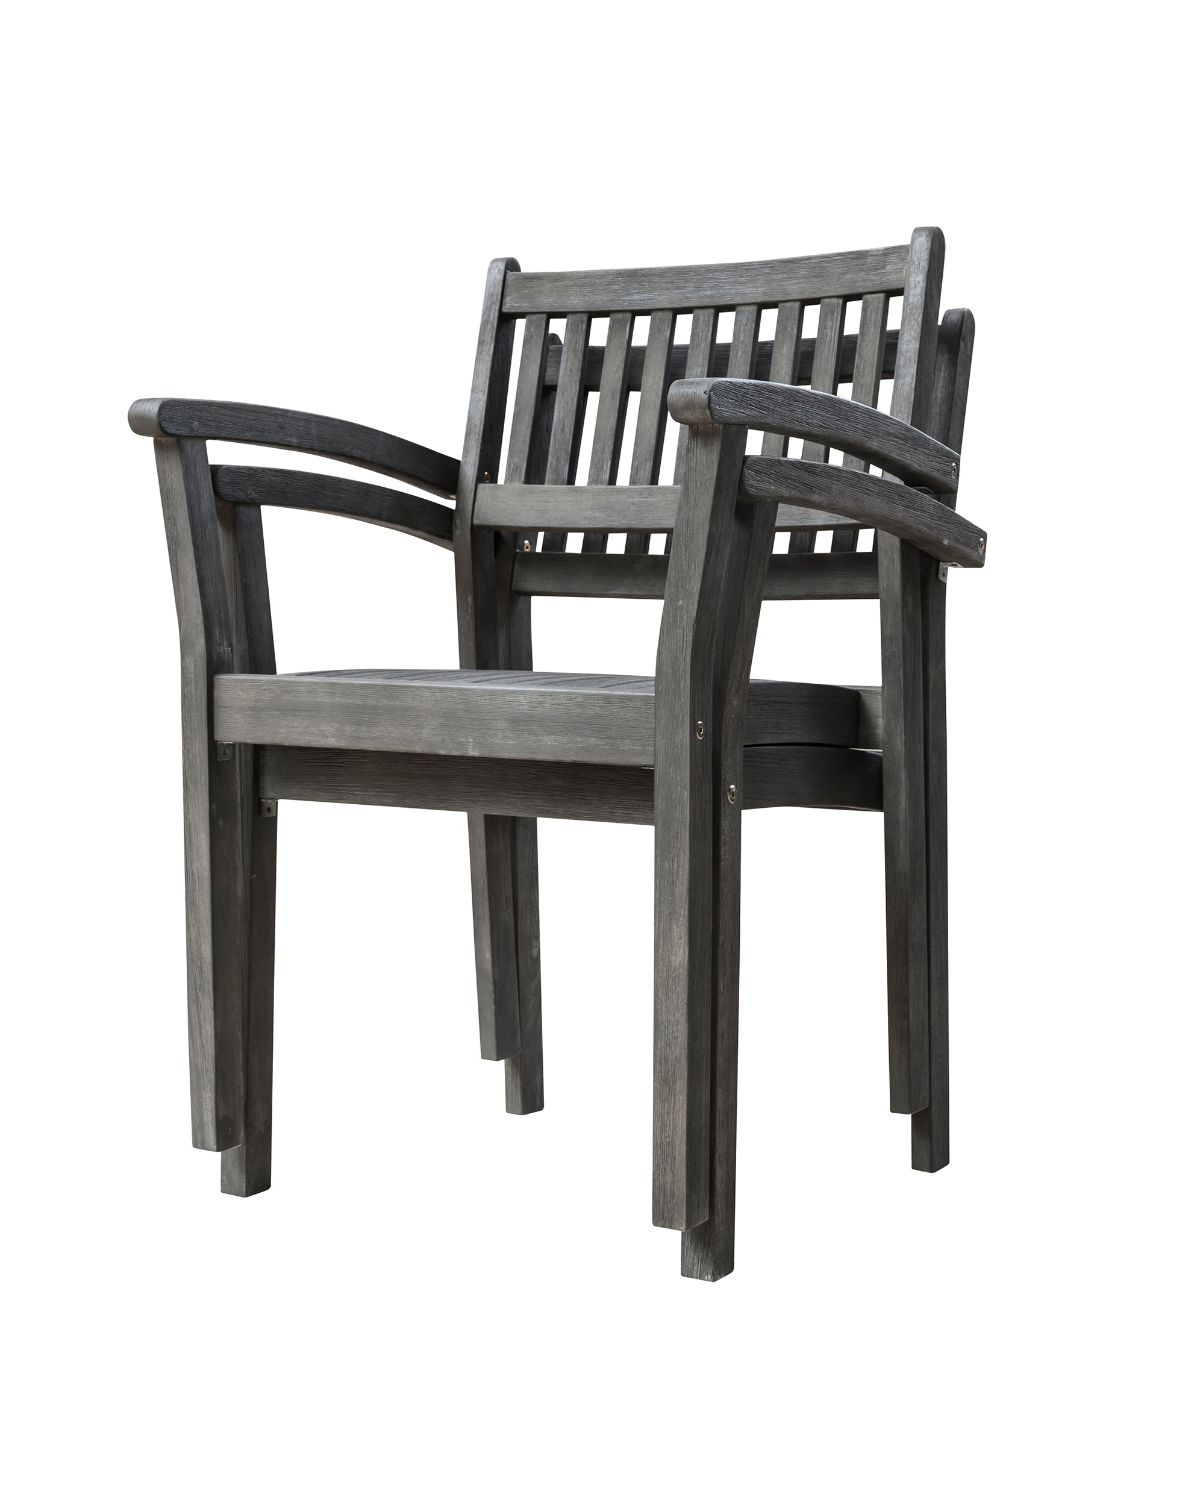 7-Piece Gray Hand Scraped Wood Finish Table Outdoor Furniture Patio Dining Set with Curvy Leg Table 59" - image 3 of 8